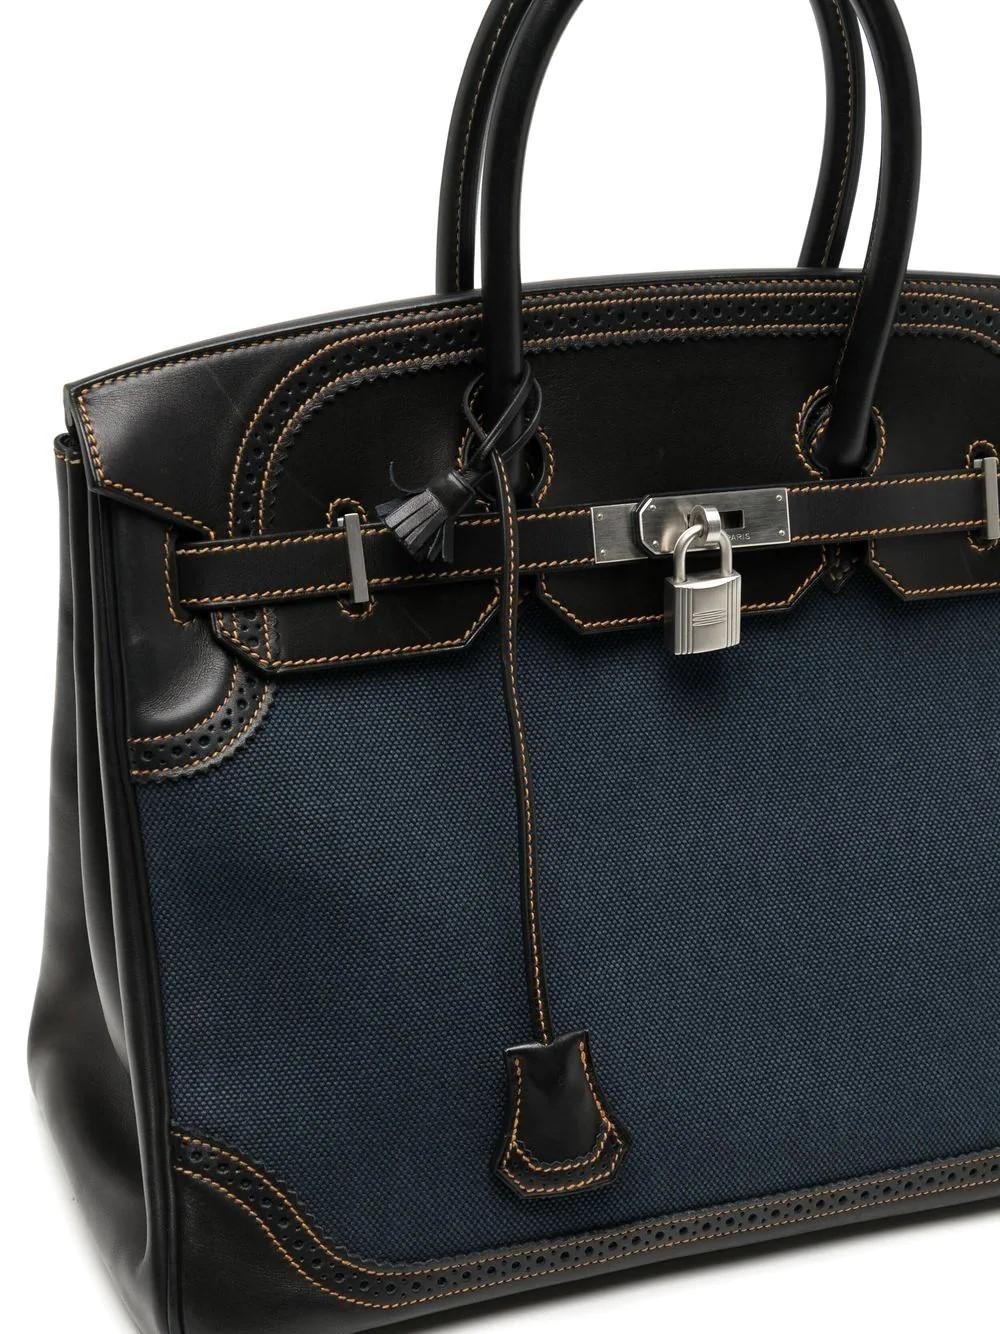 The Ghillies bags referred specifically to a Scottish version of the shoe, known as the ‘ghillie brogue’. 
A highly sought-after and sophisticated piece this Hermès Indigo Denim and Navy Blue Evercalf Leather Ghillies Birkin 35 is a truly special